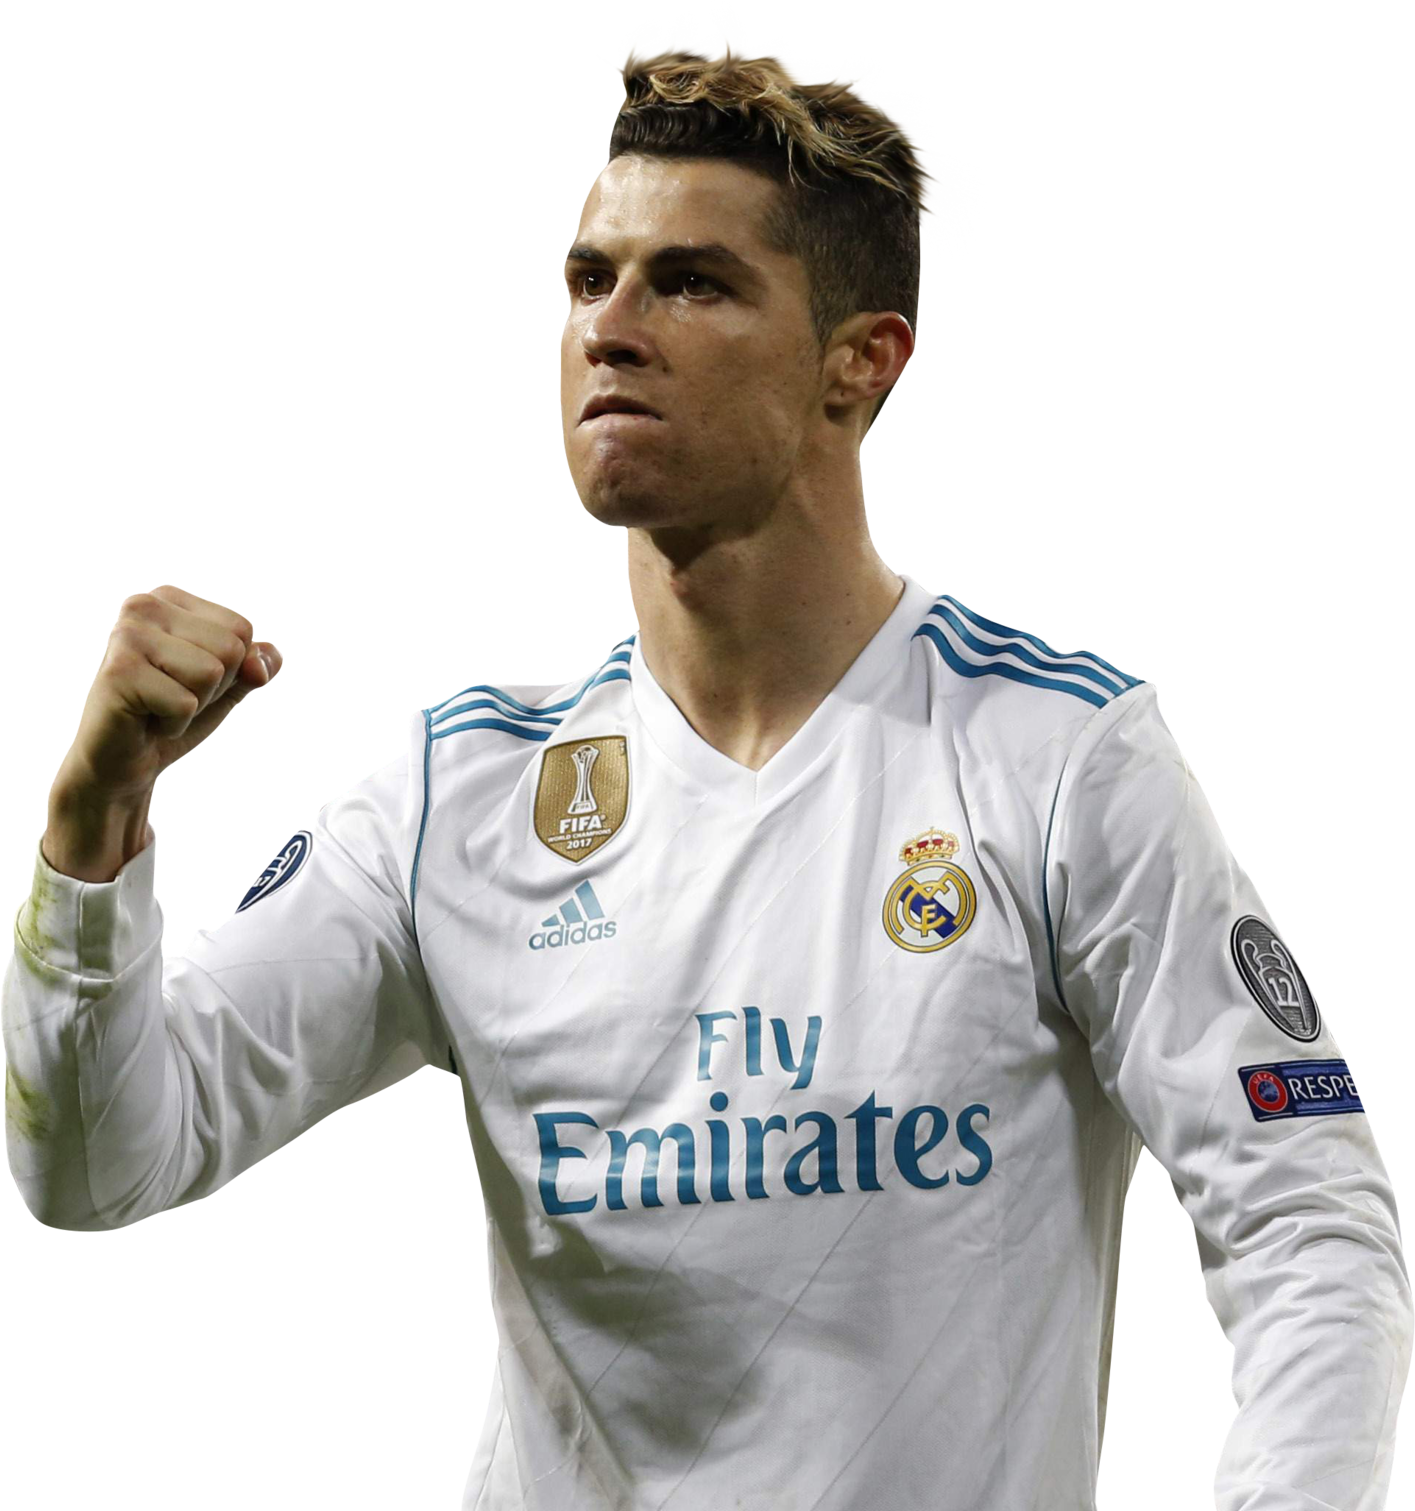 Cristiano Ronaldo Football Render 88128 Footyrenders | Images and ...